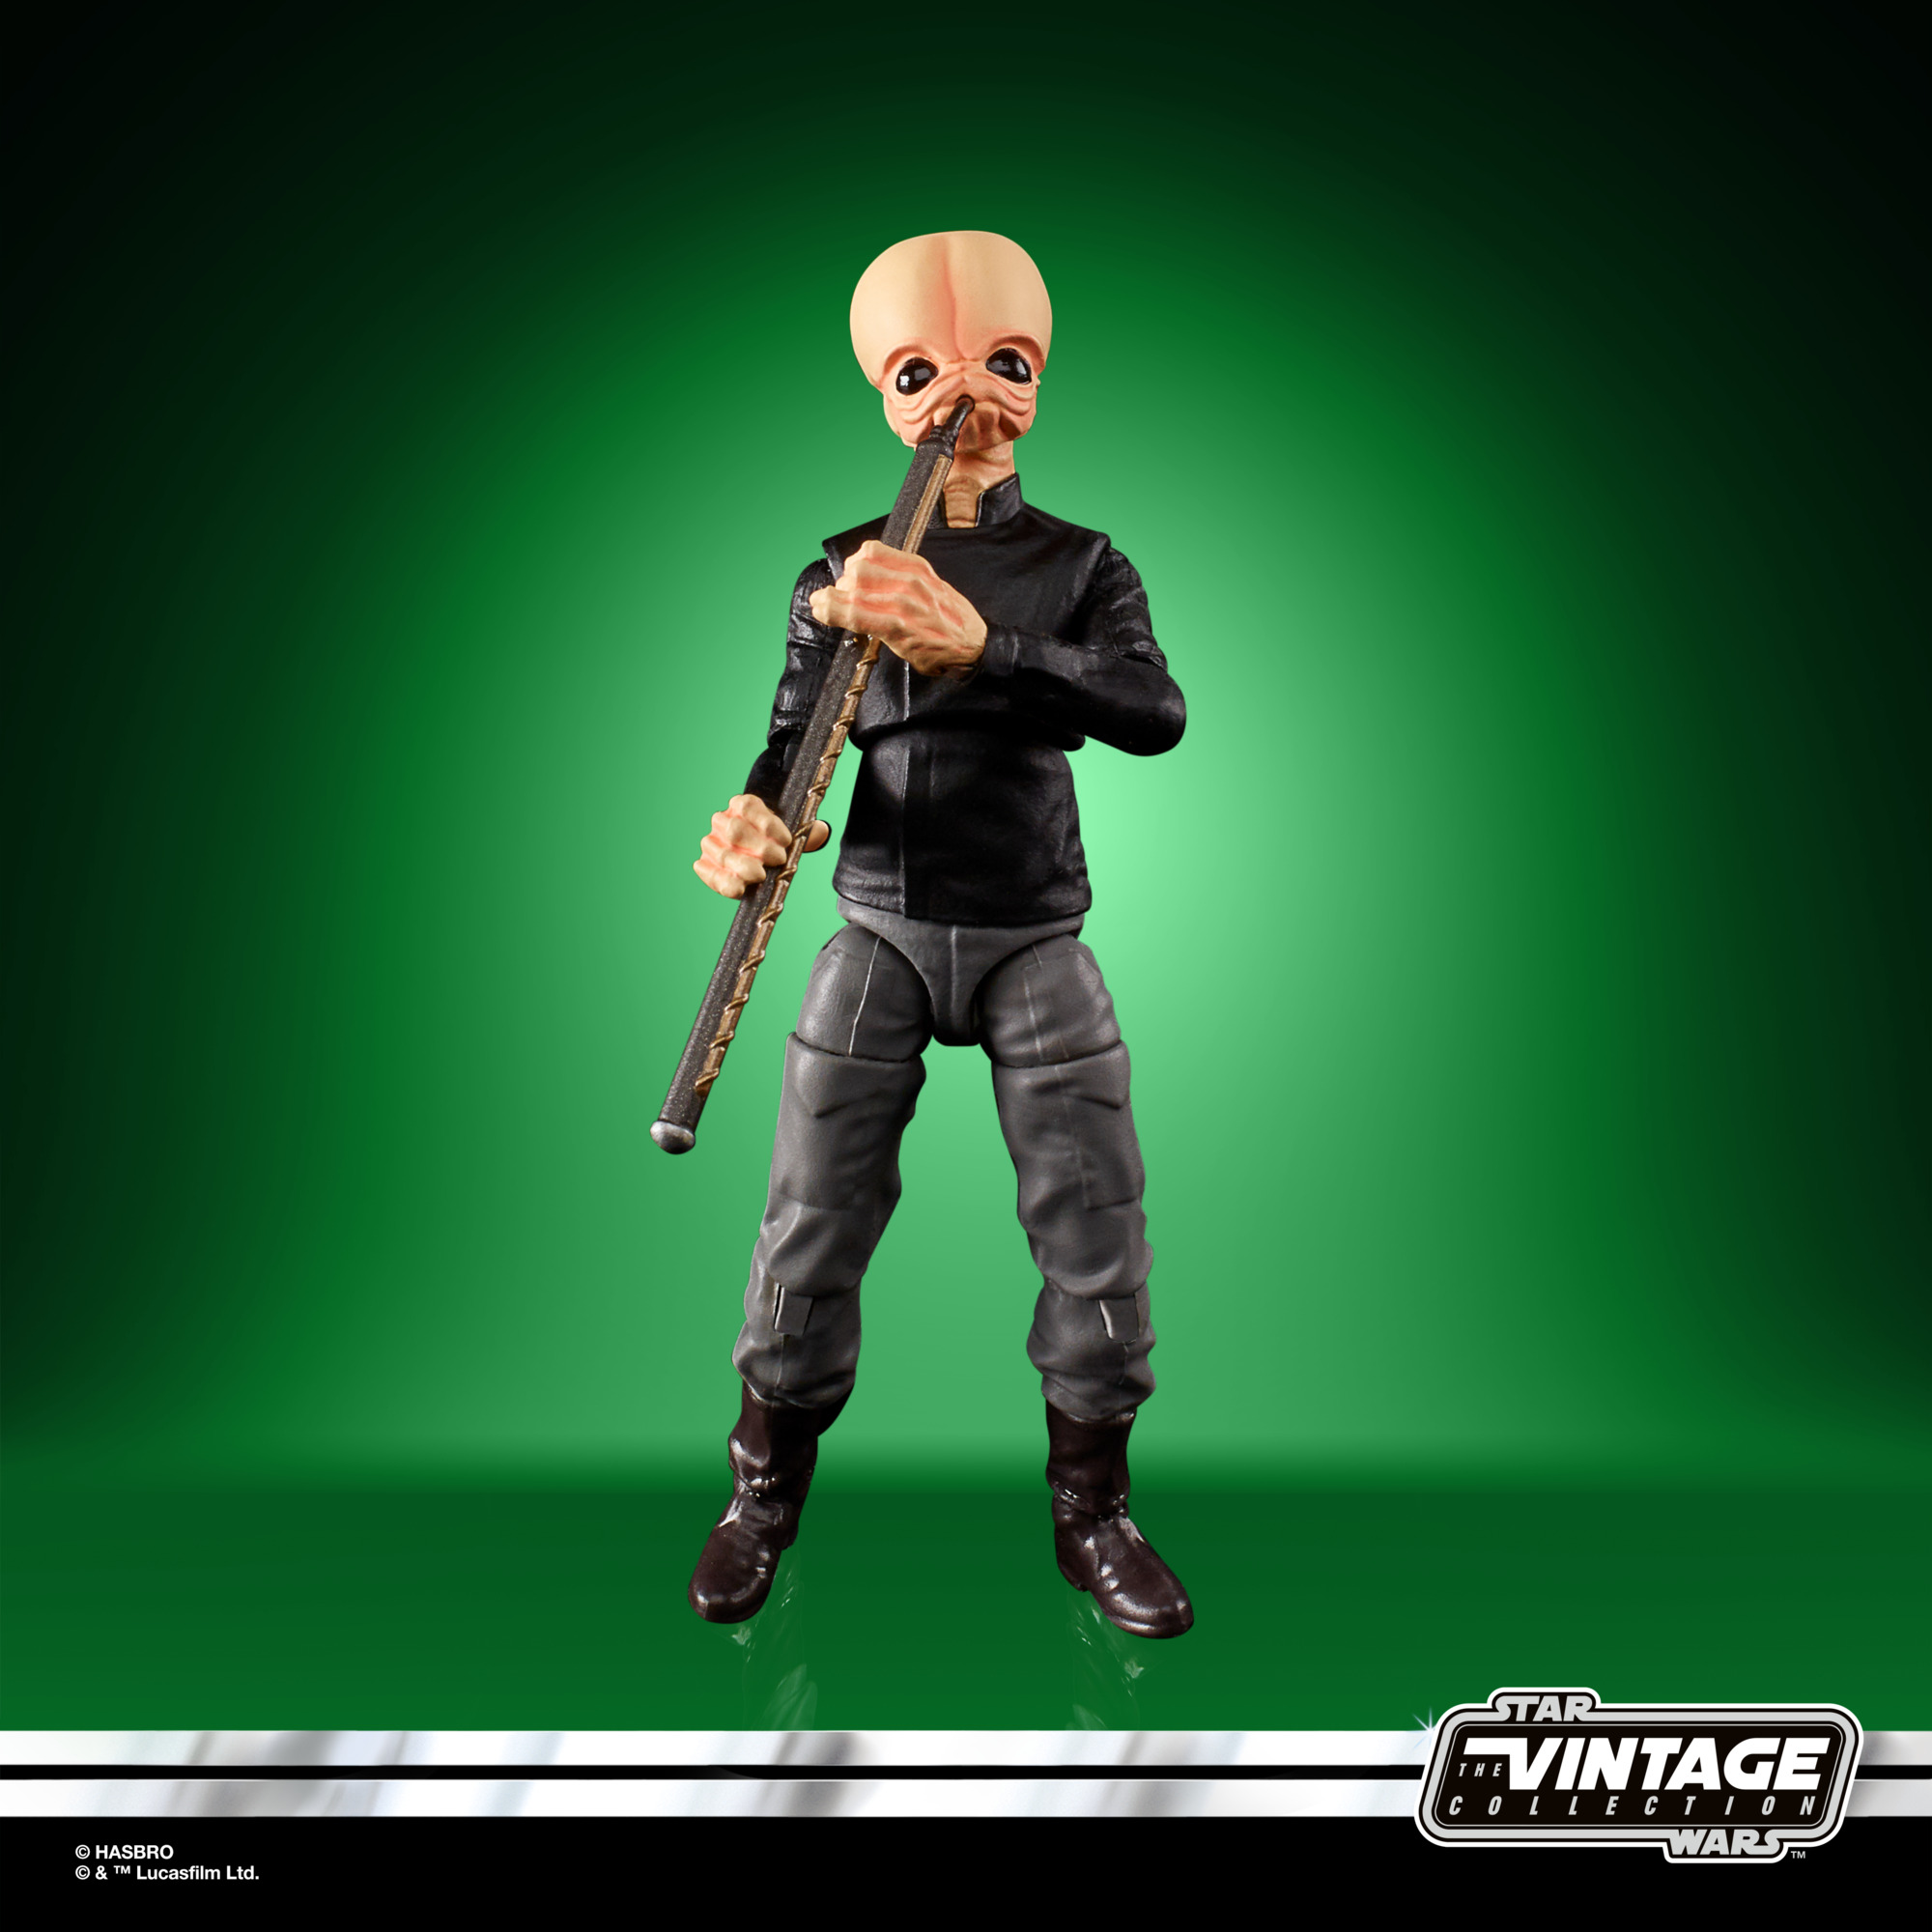 Exclusive Galactic Figures Reveal Of Figrin D'An